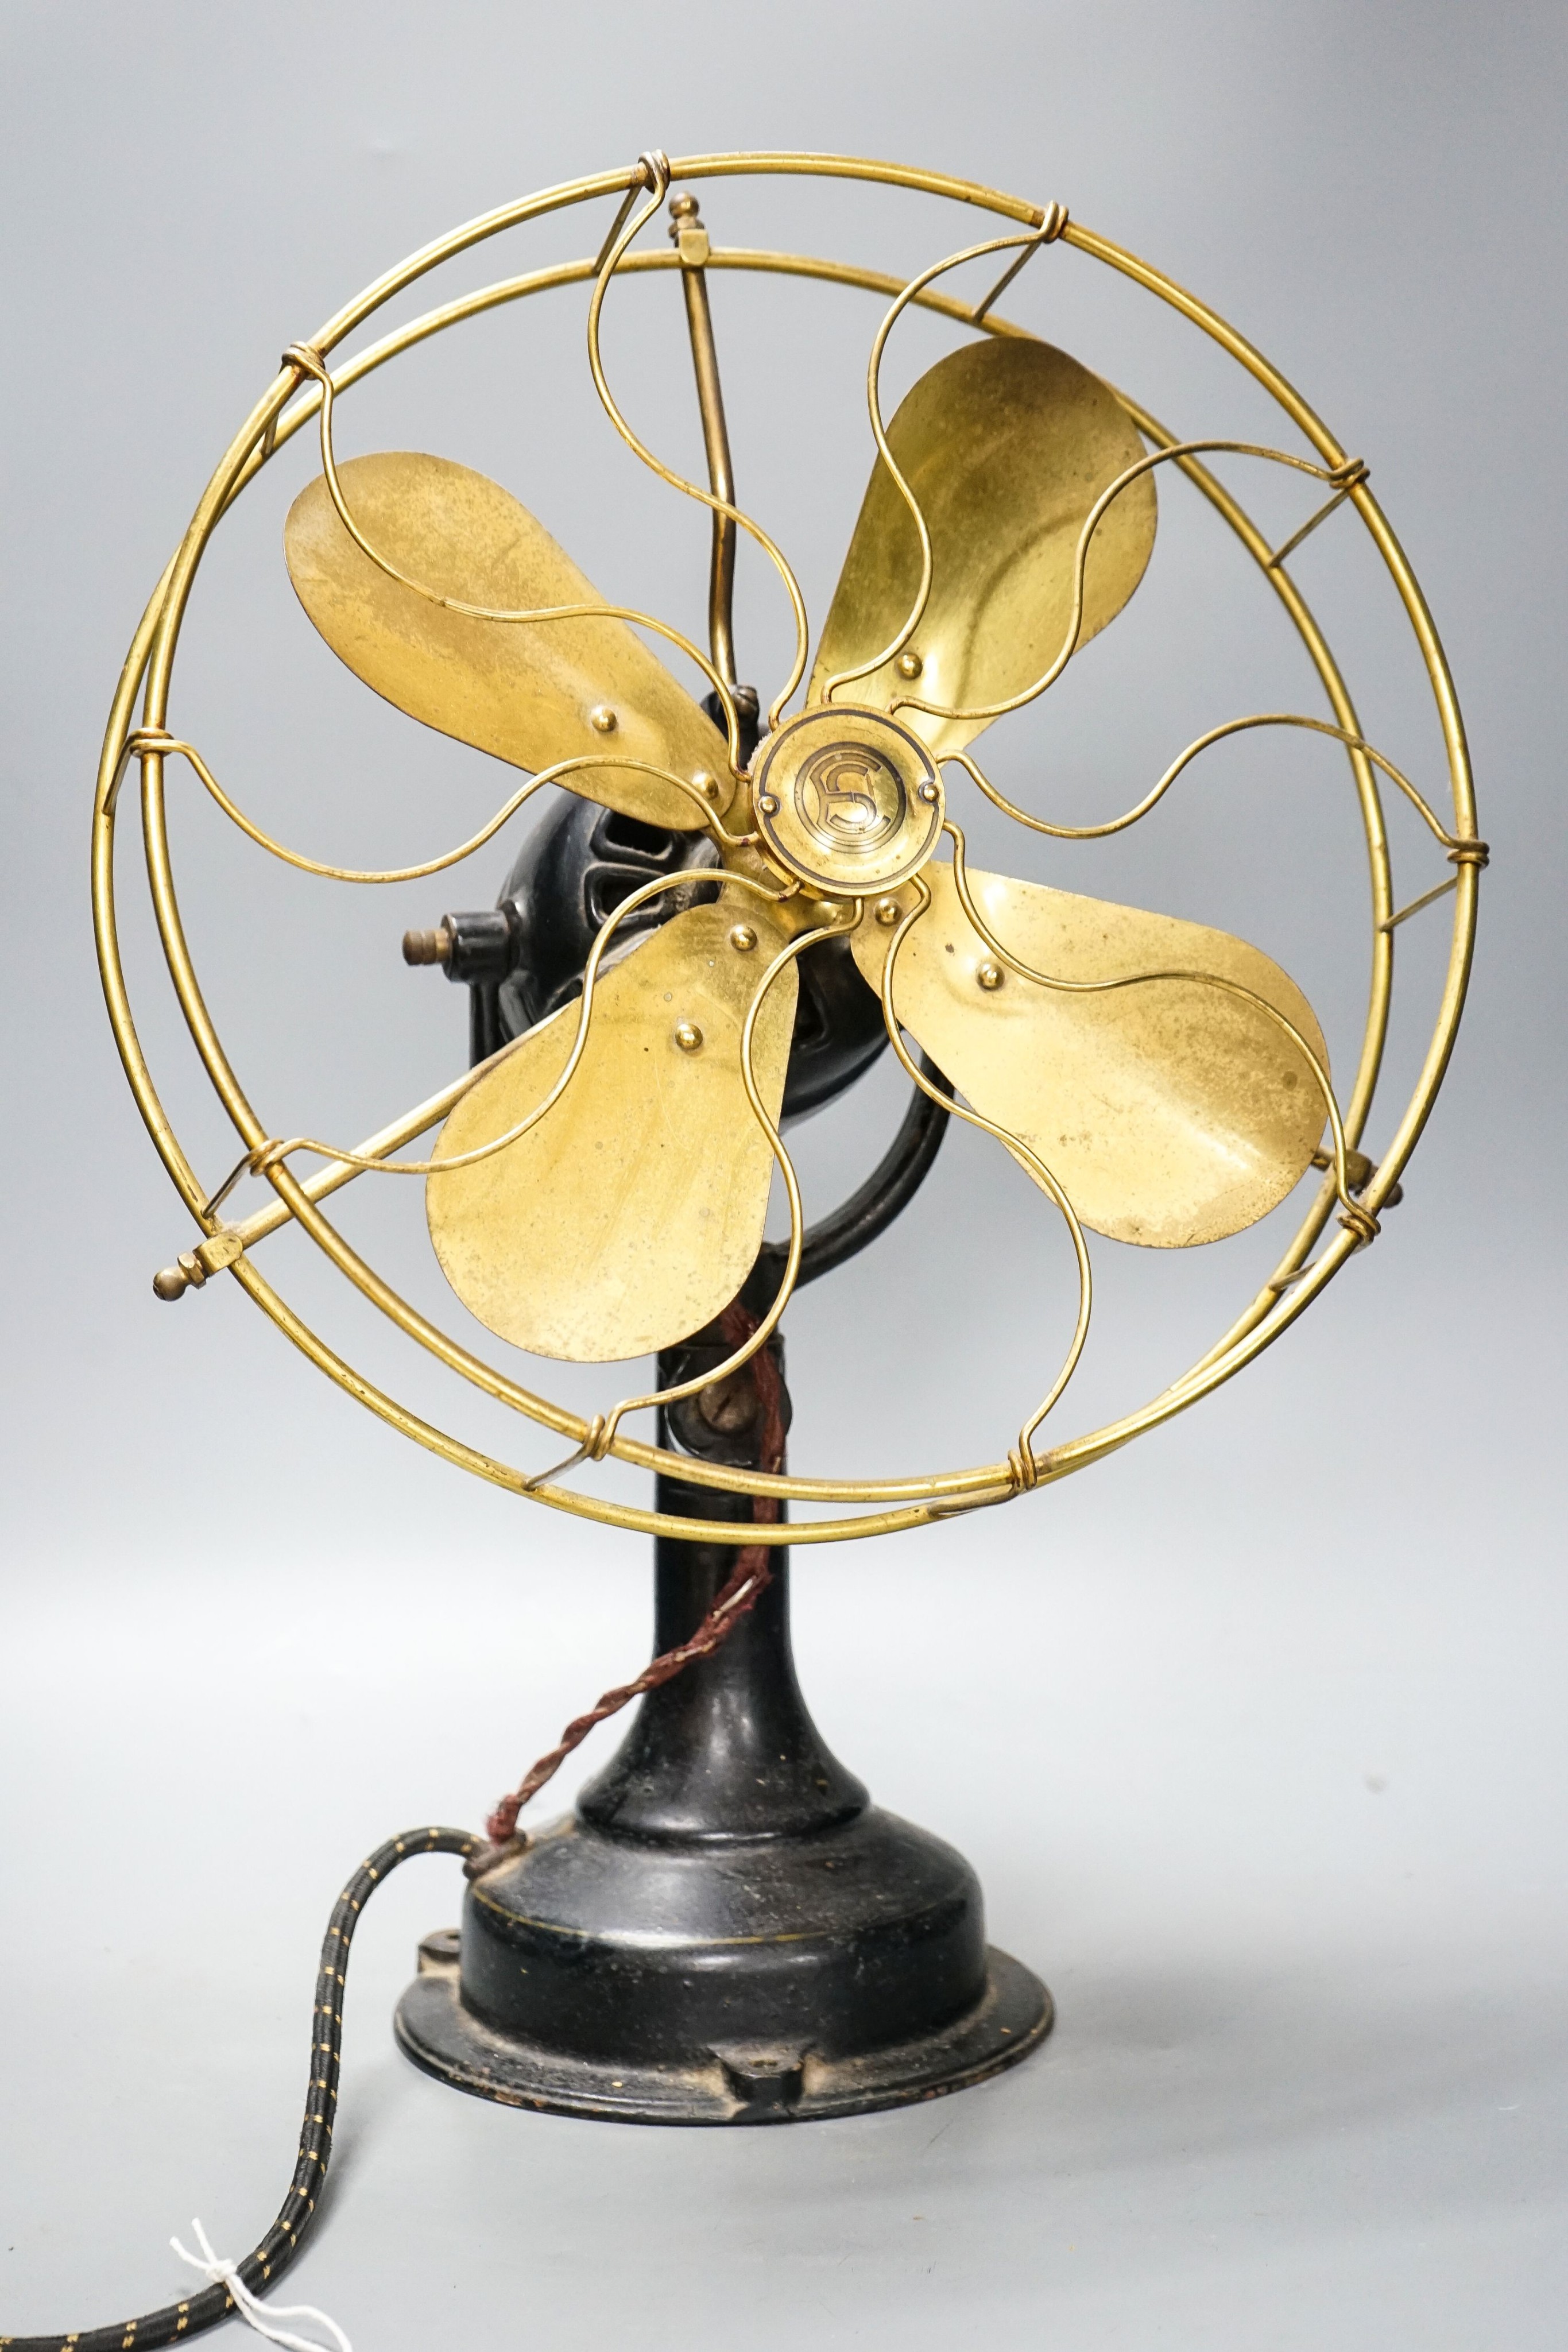 A vintage electric oscillating fan